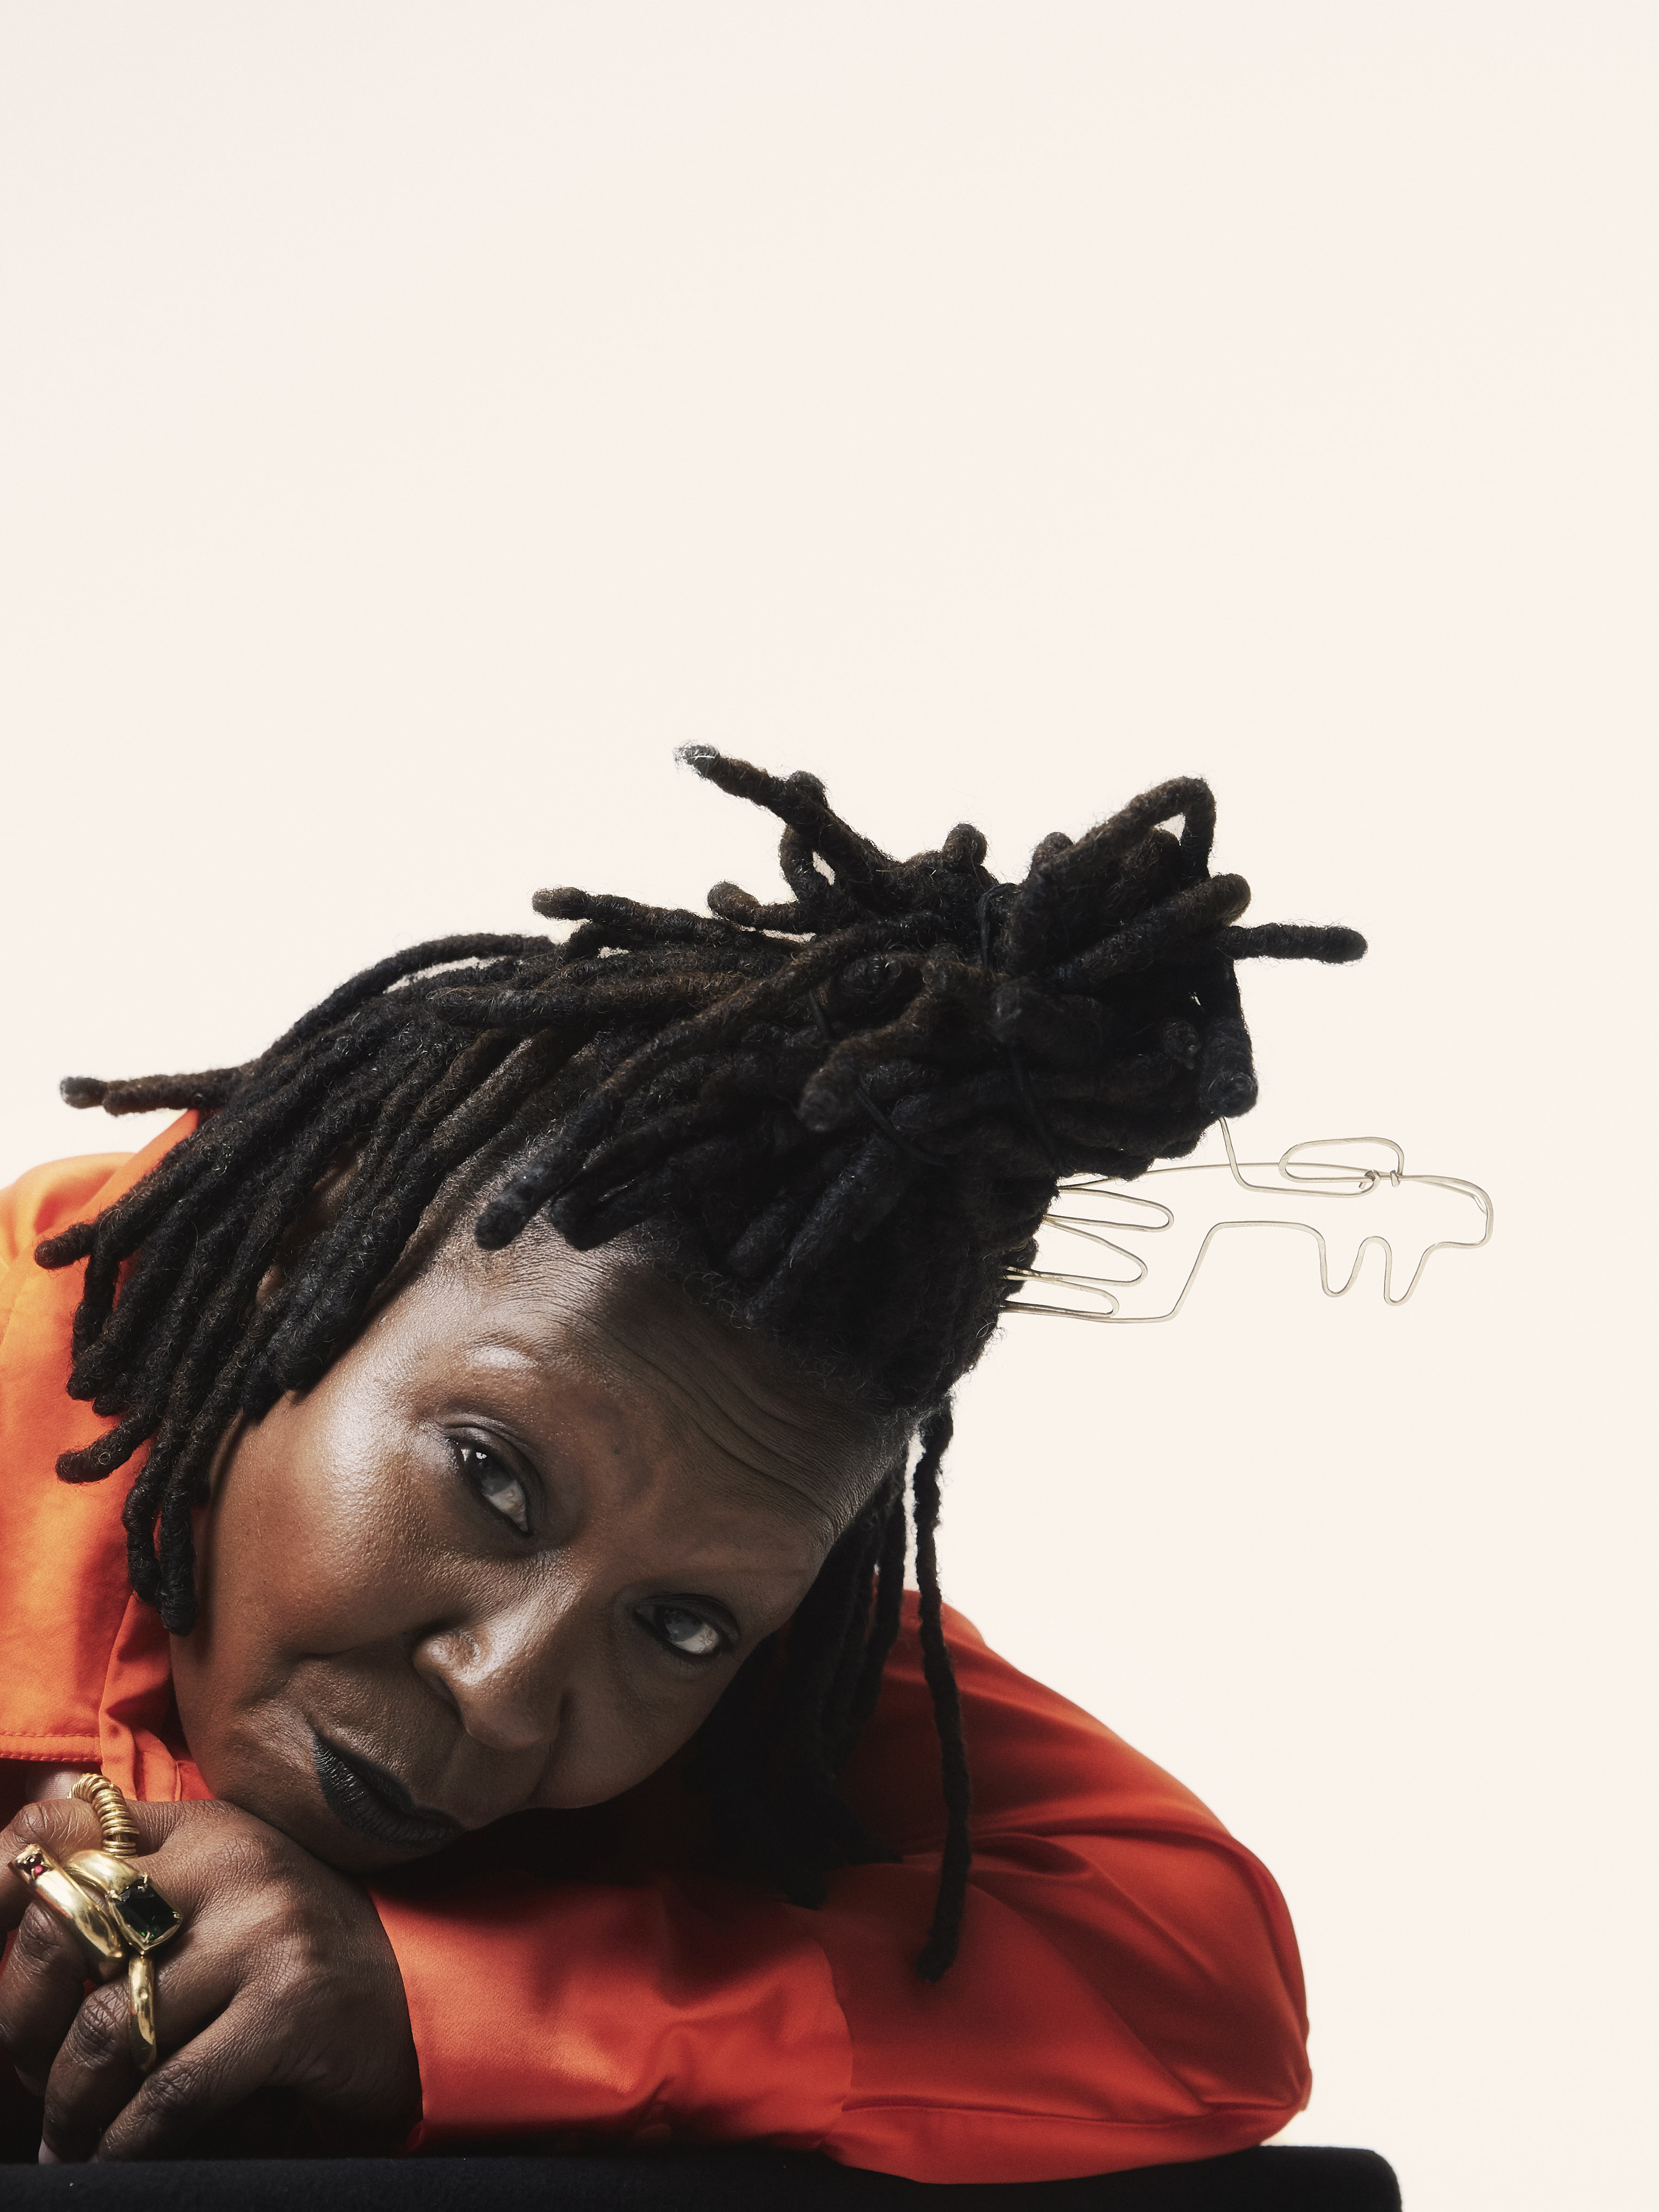 Why does whoopi goldberg have no eyebrows